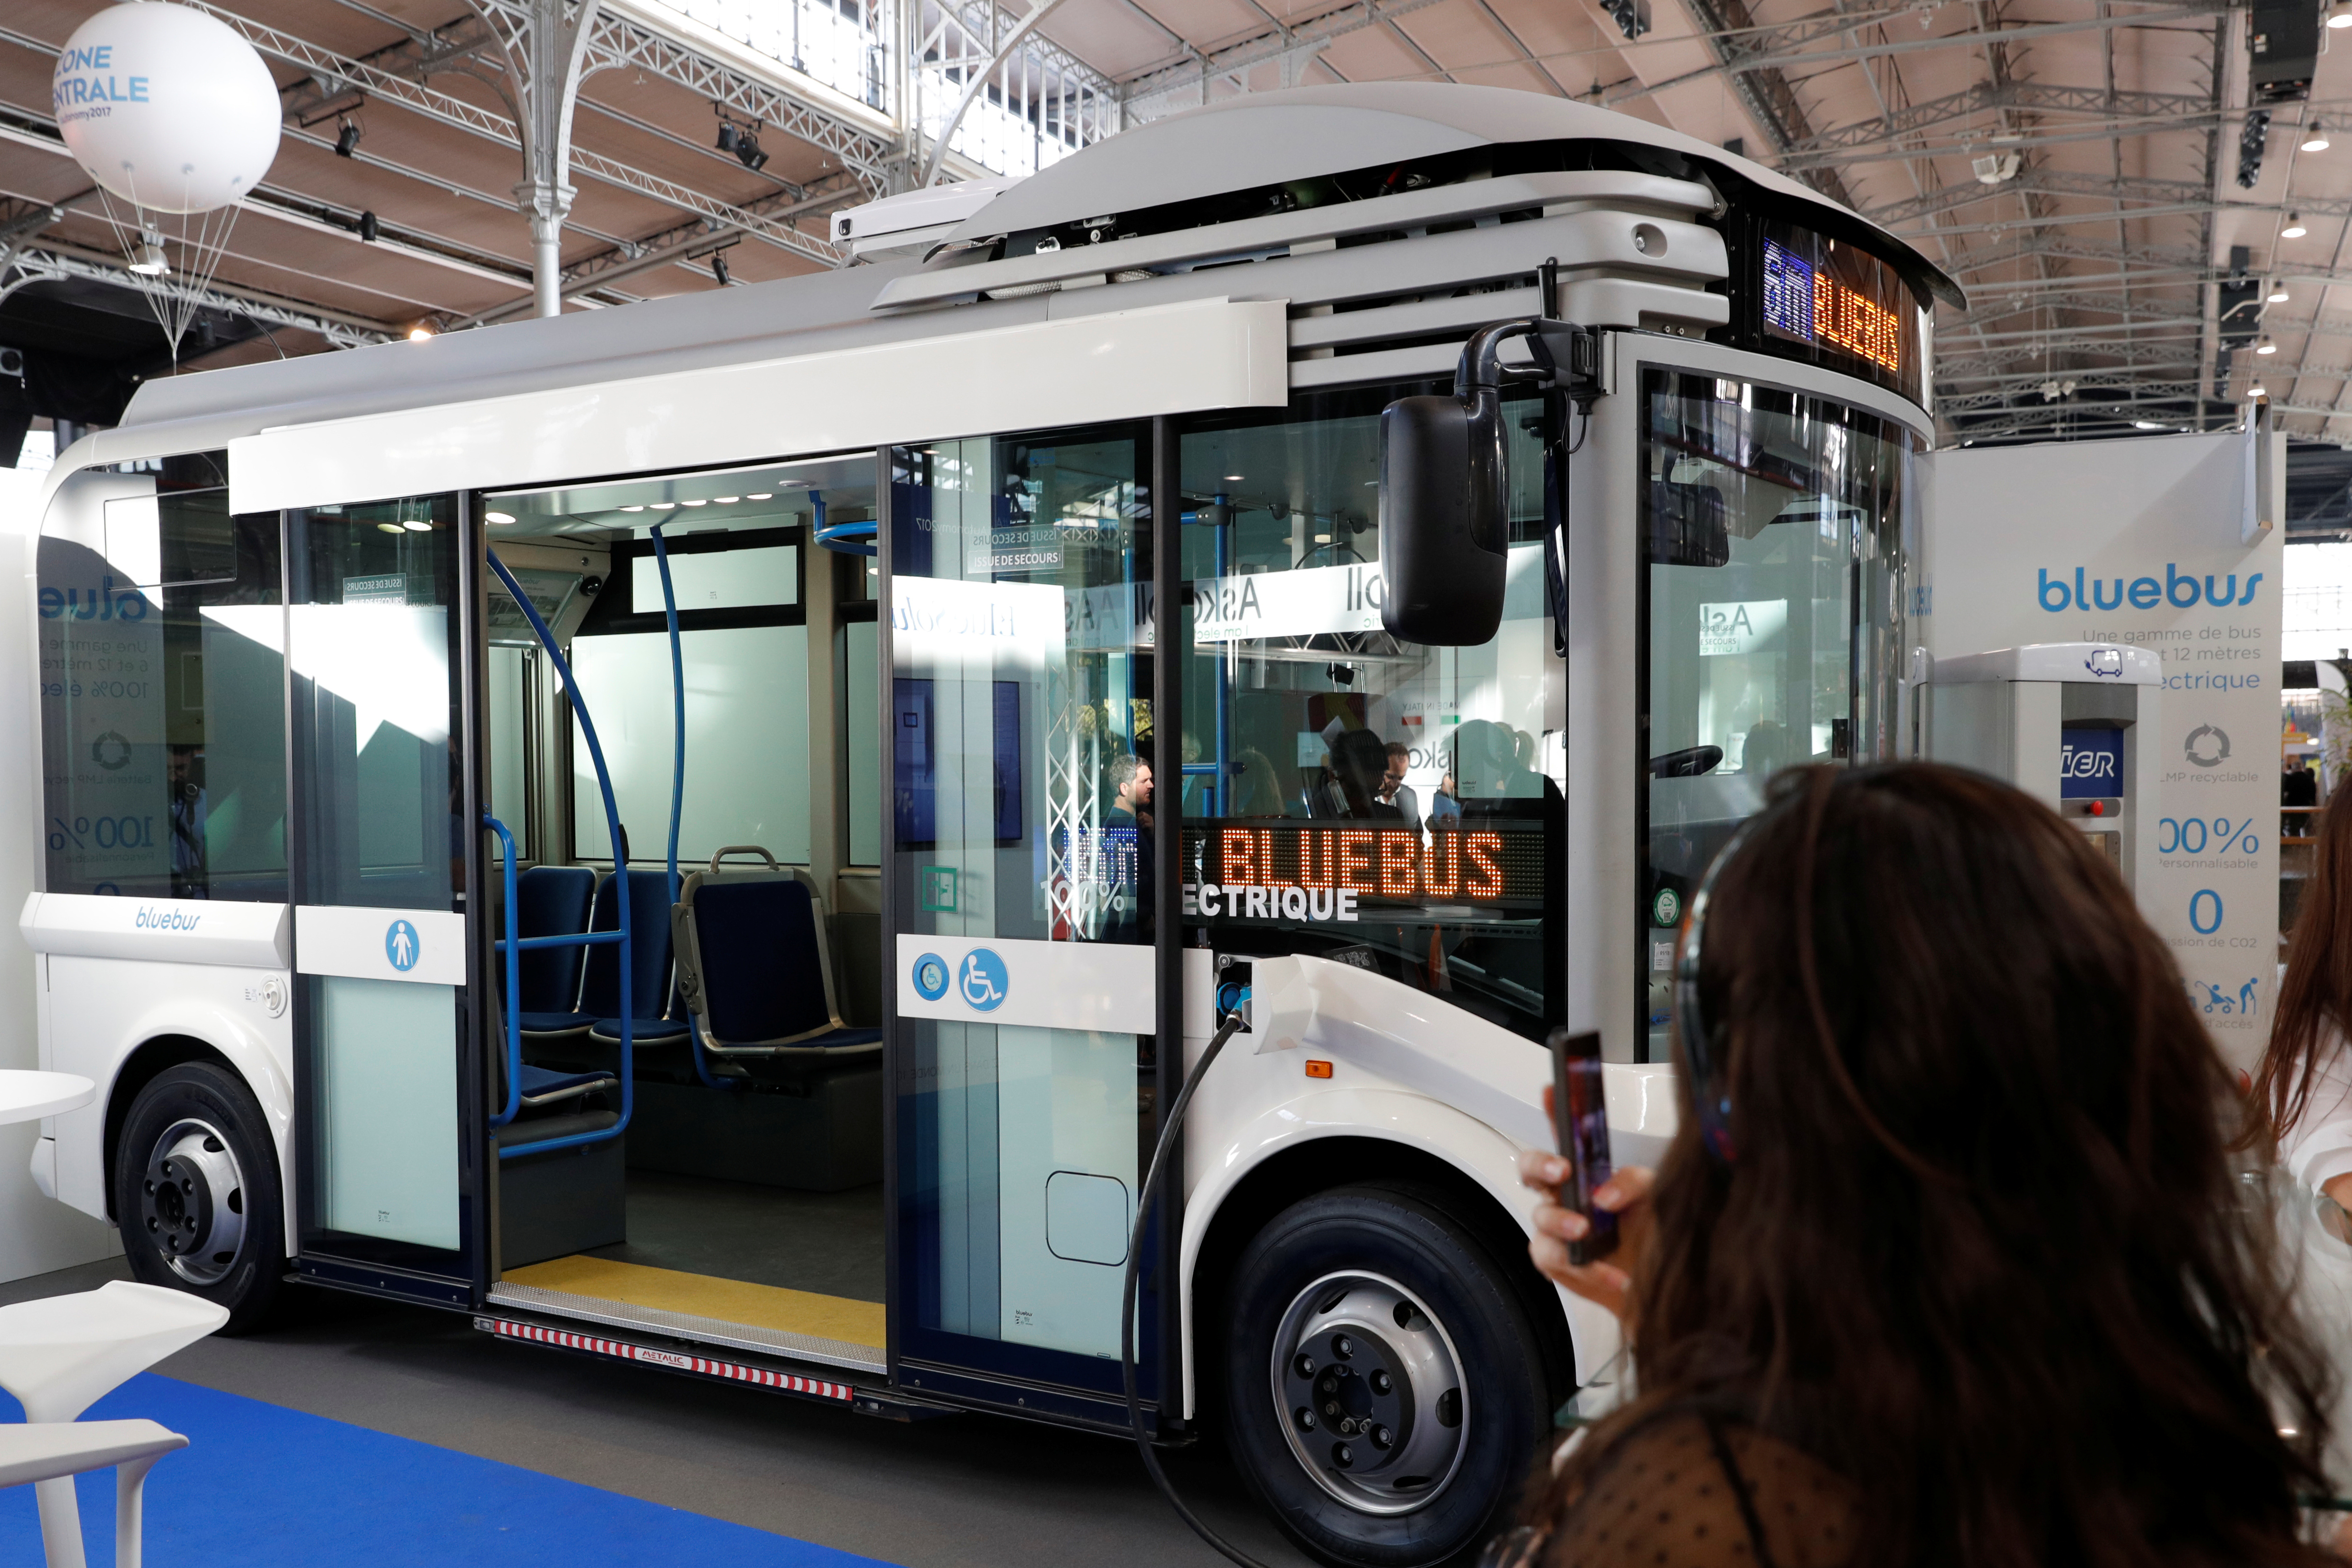 A Bluebus electric bus by Bollore is diplayed at Autonomy and the Urban mobility summit in Paris